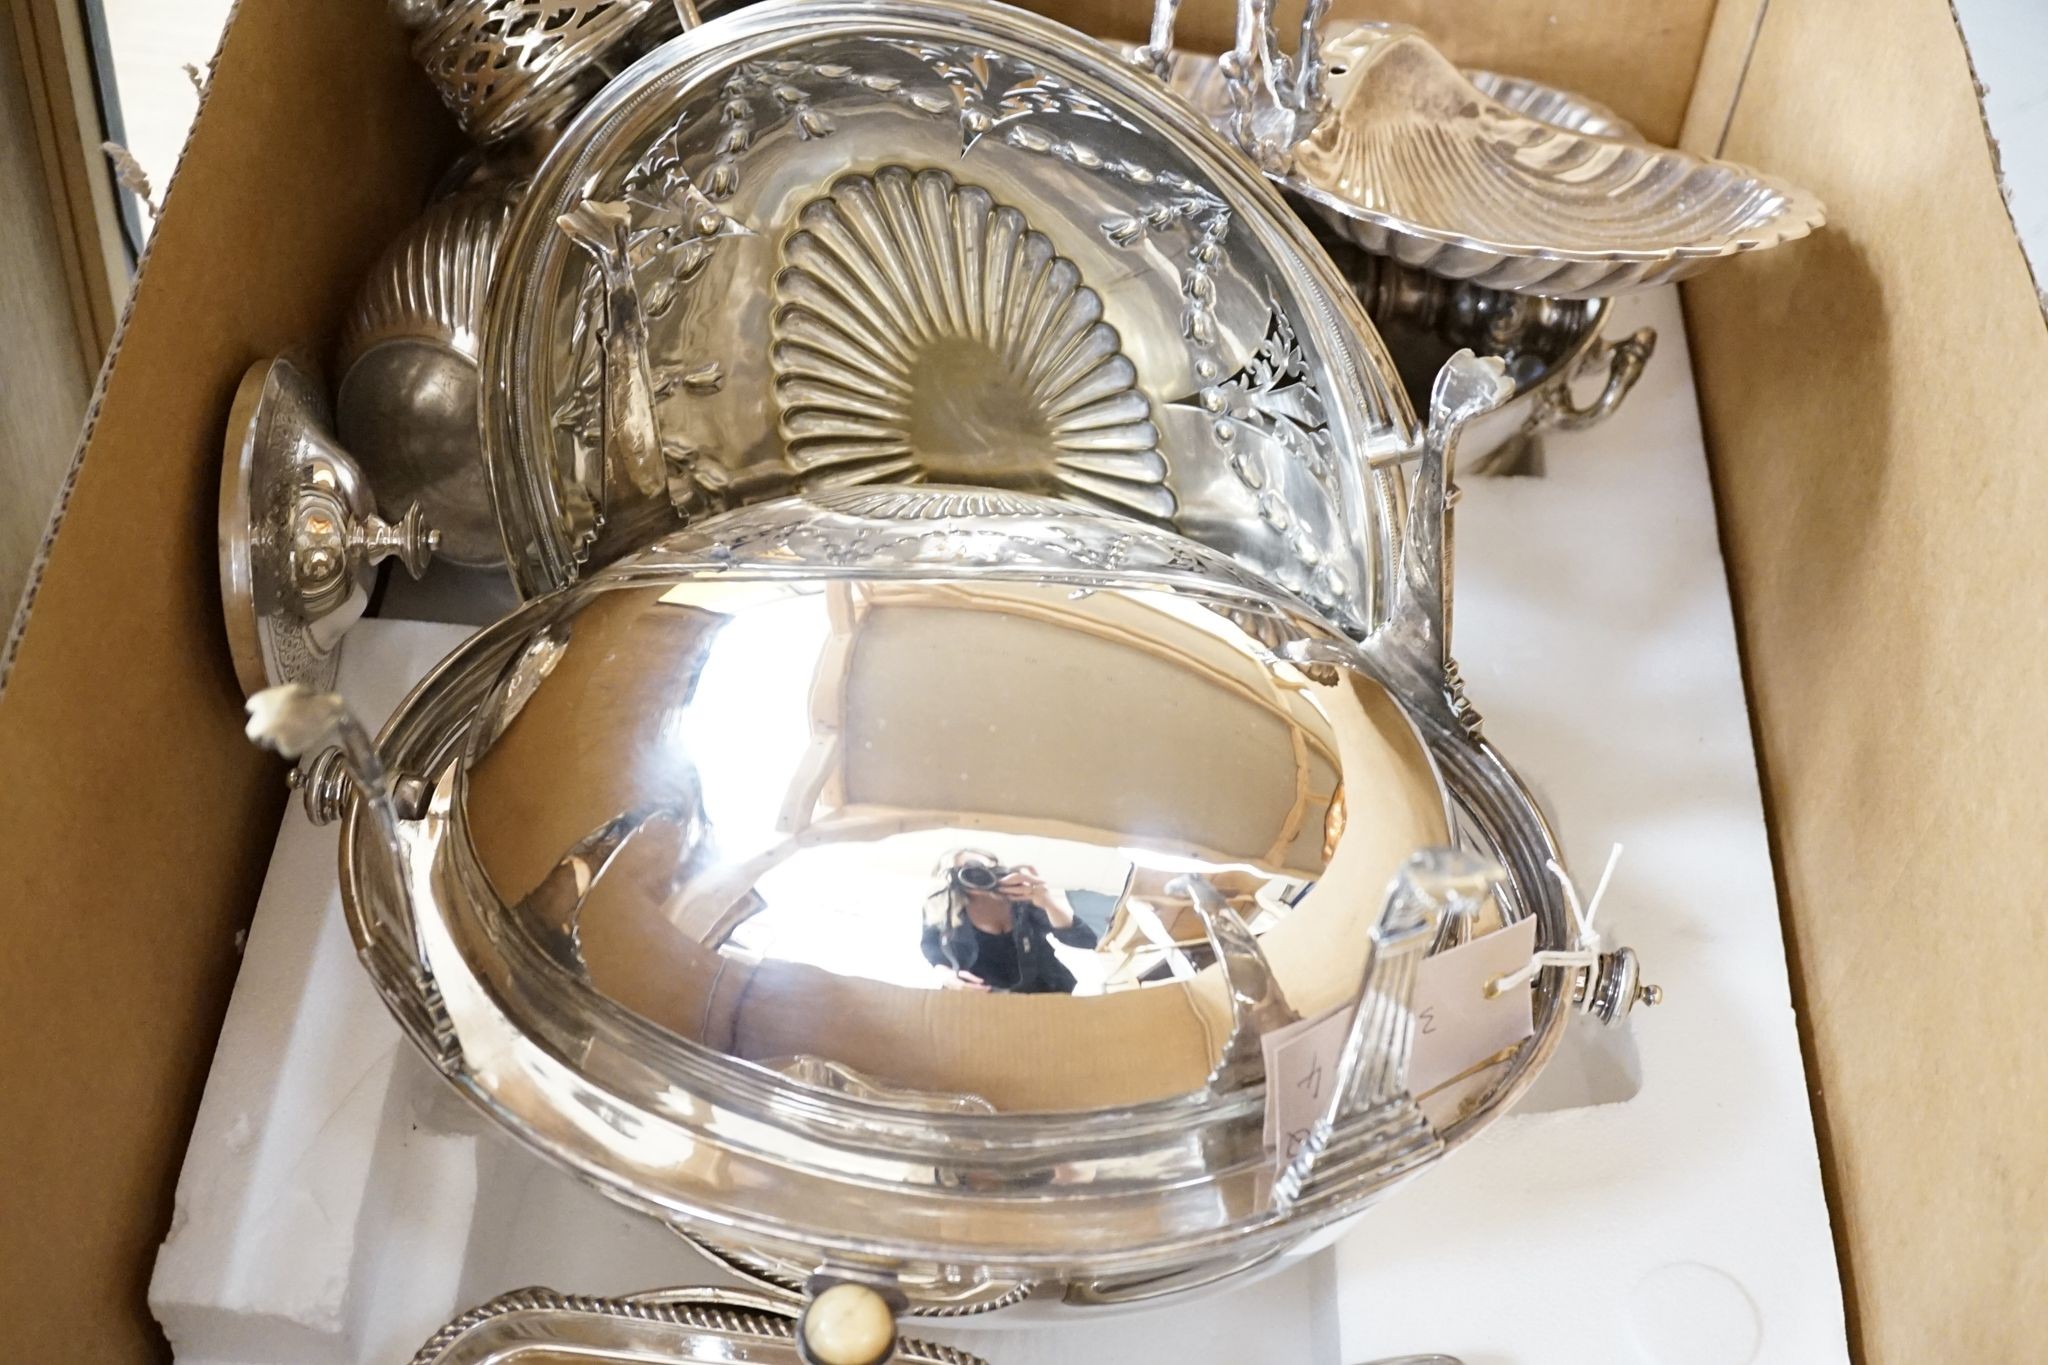 A quantity of plated wares including a breakfast dish, serving dishes etc